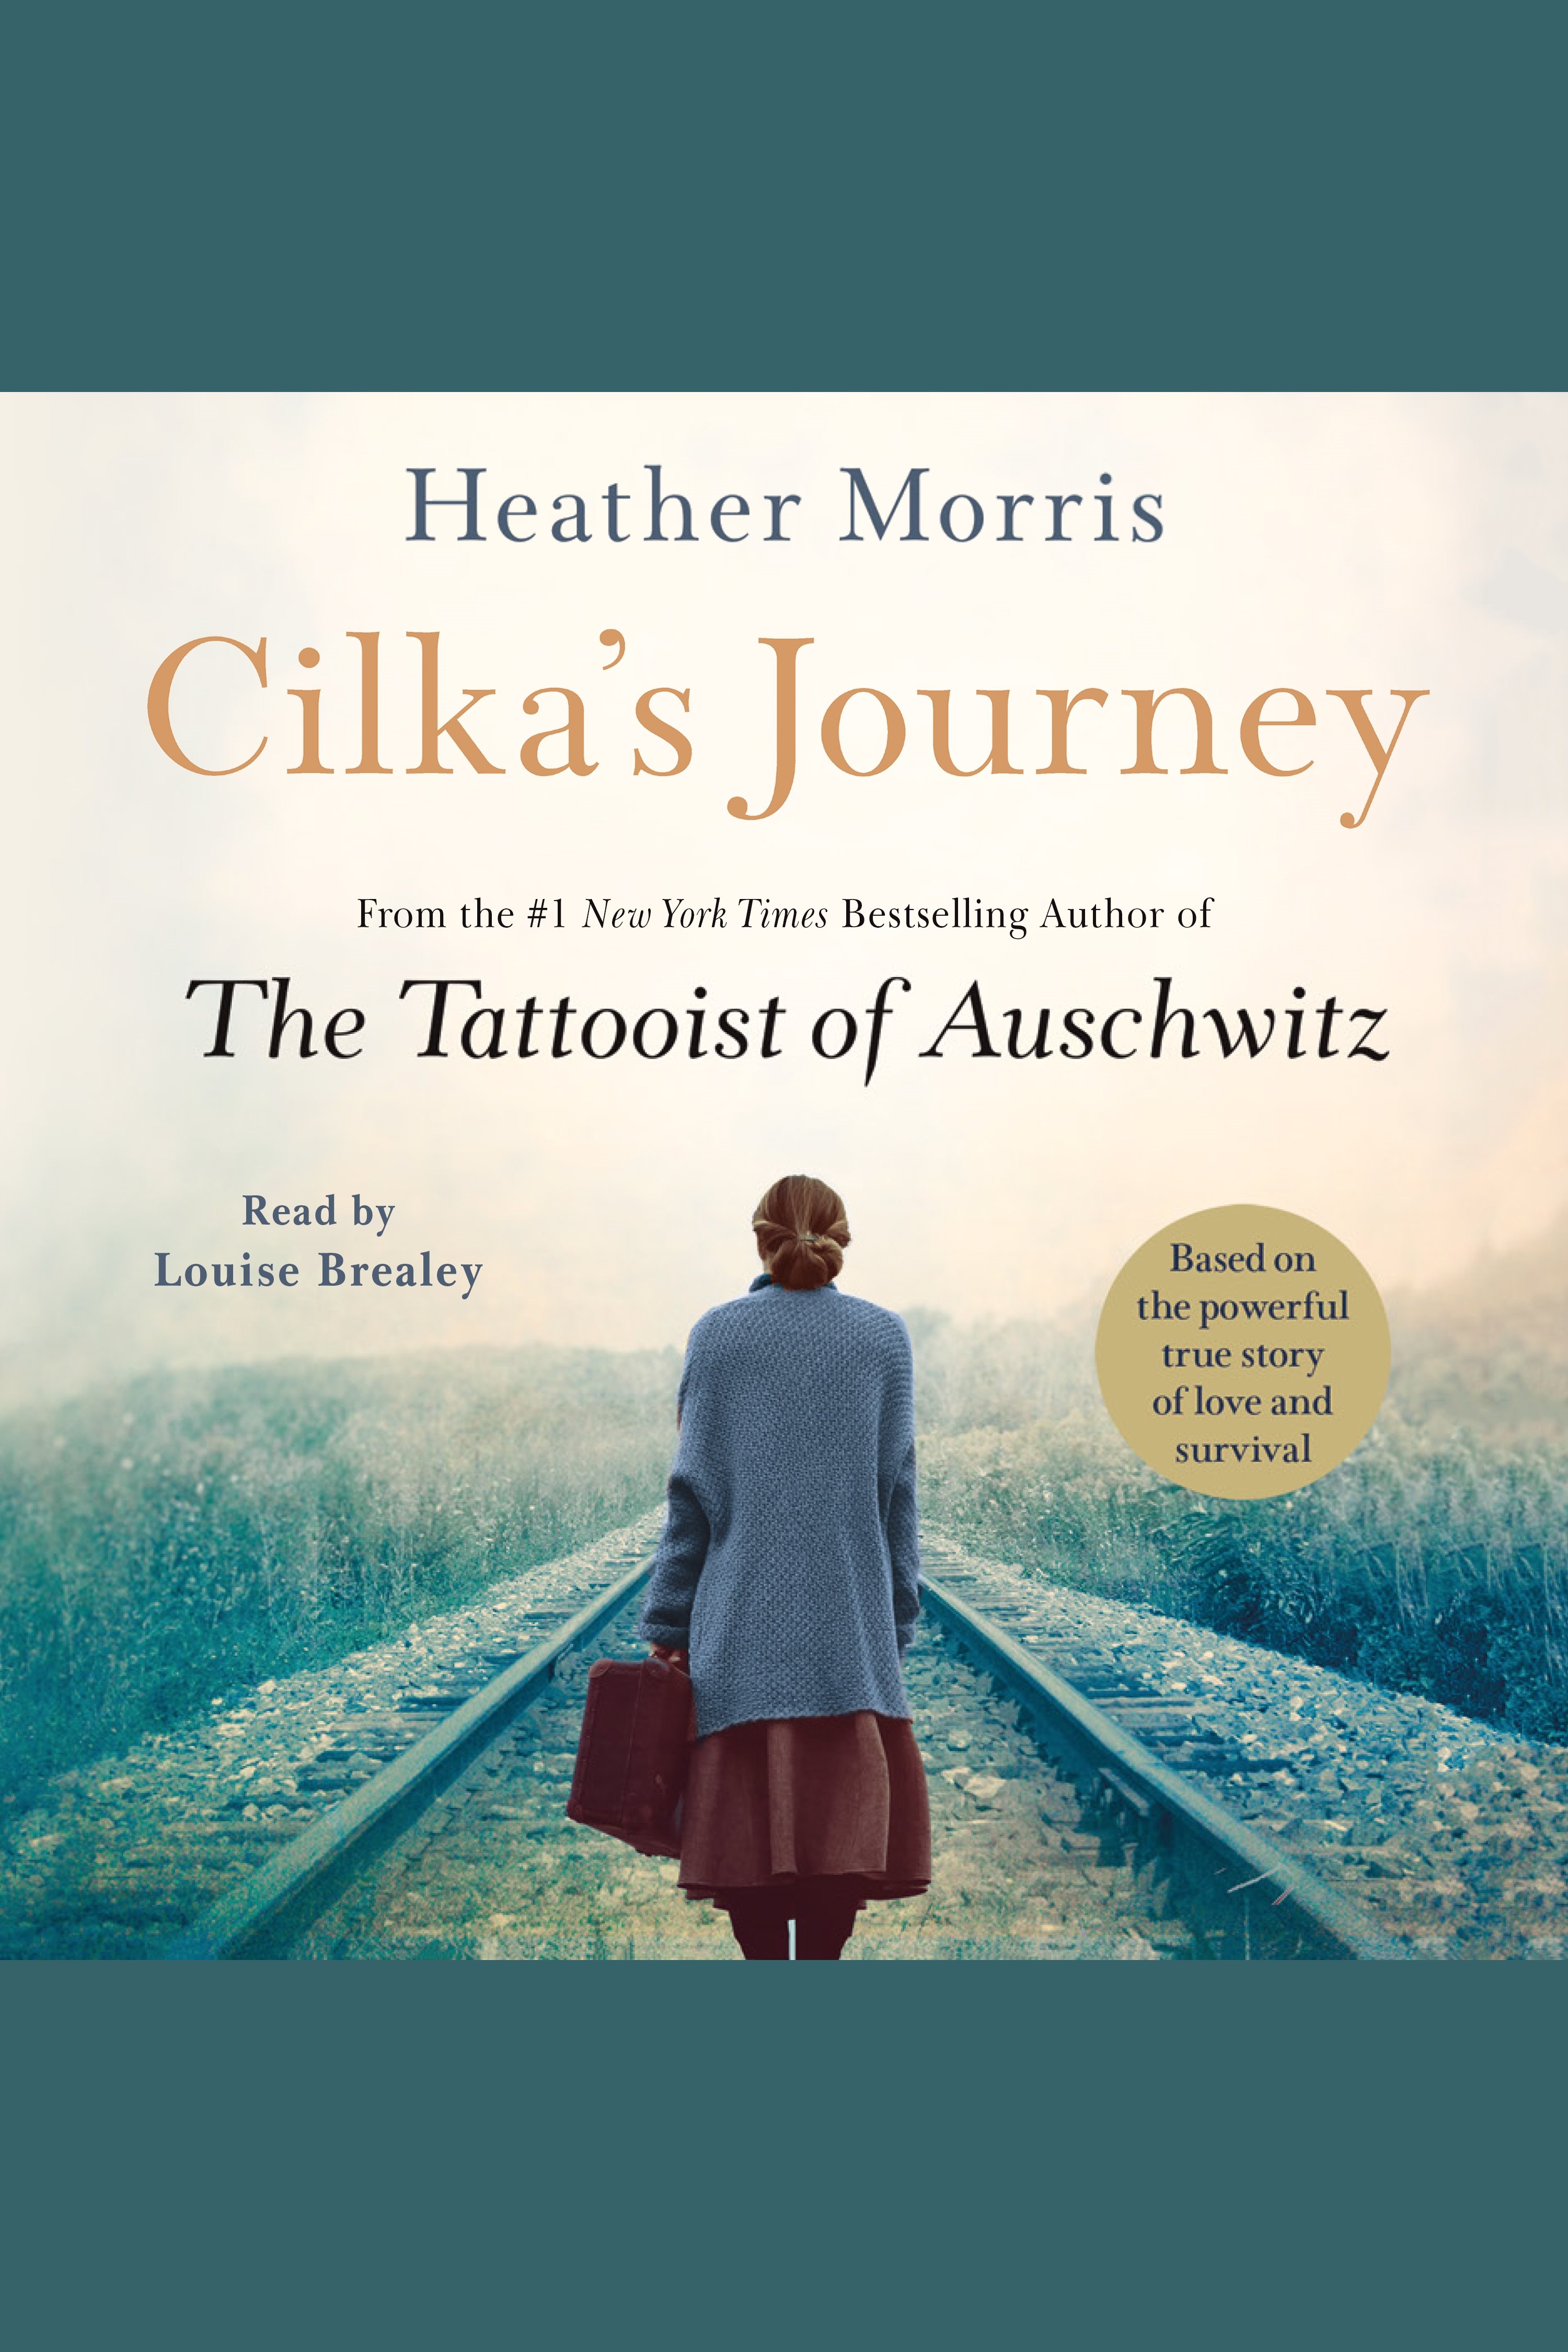 Cilka's journey cover image